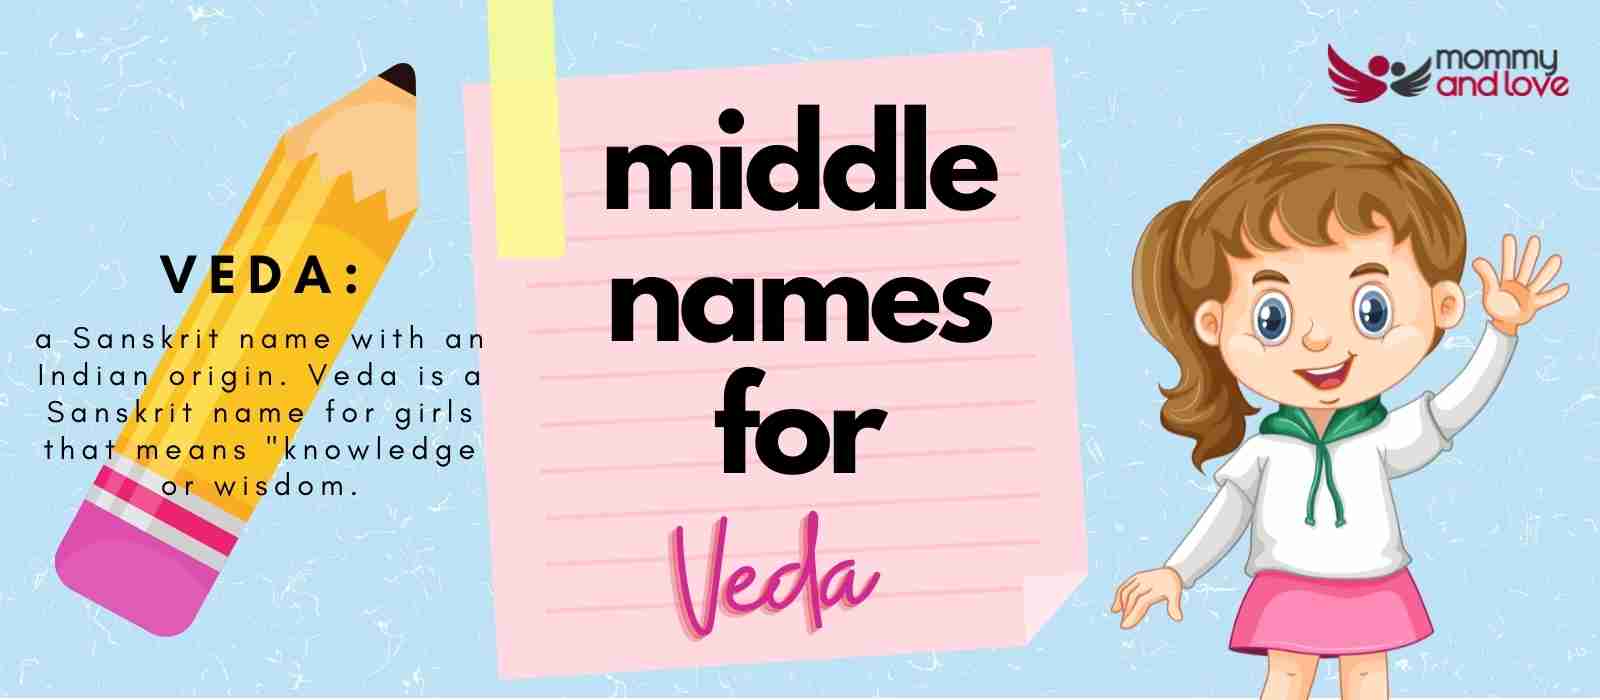 Middle Names for Veda